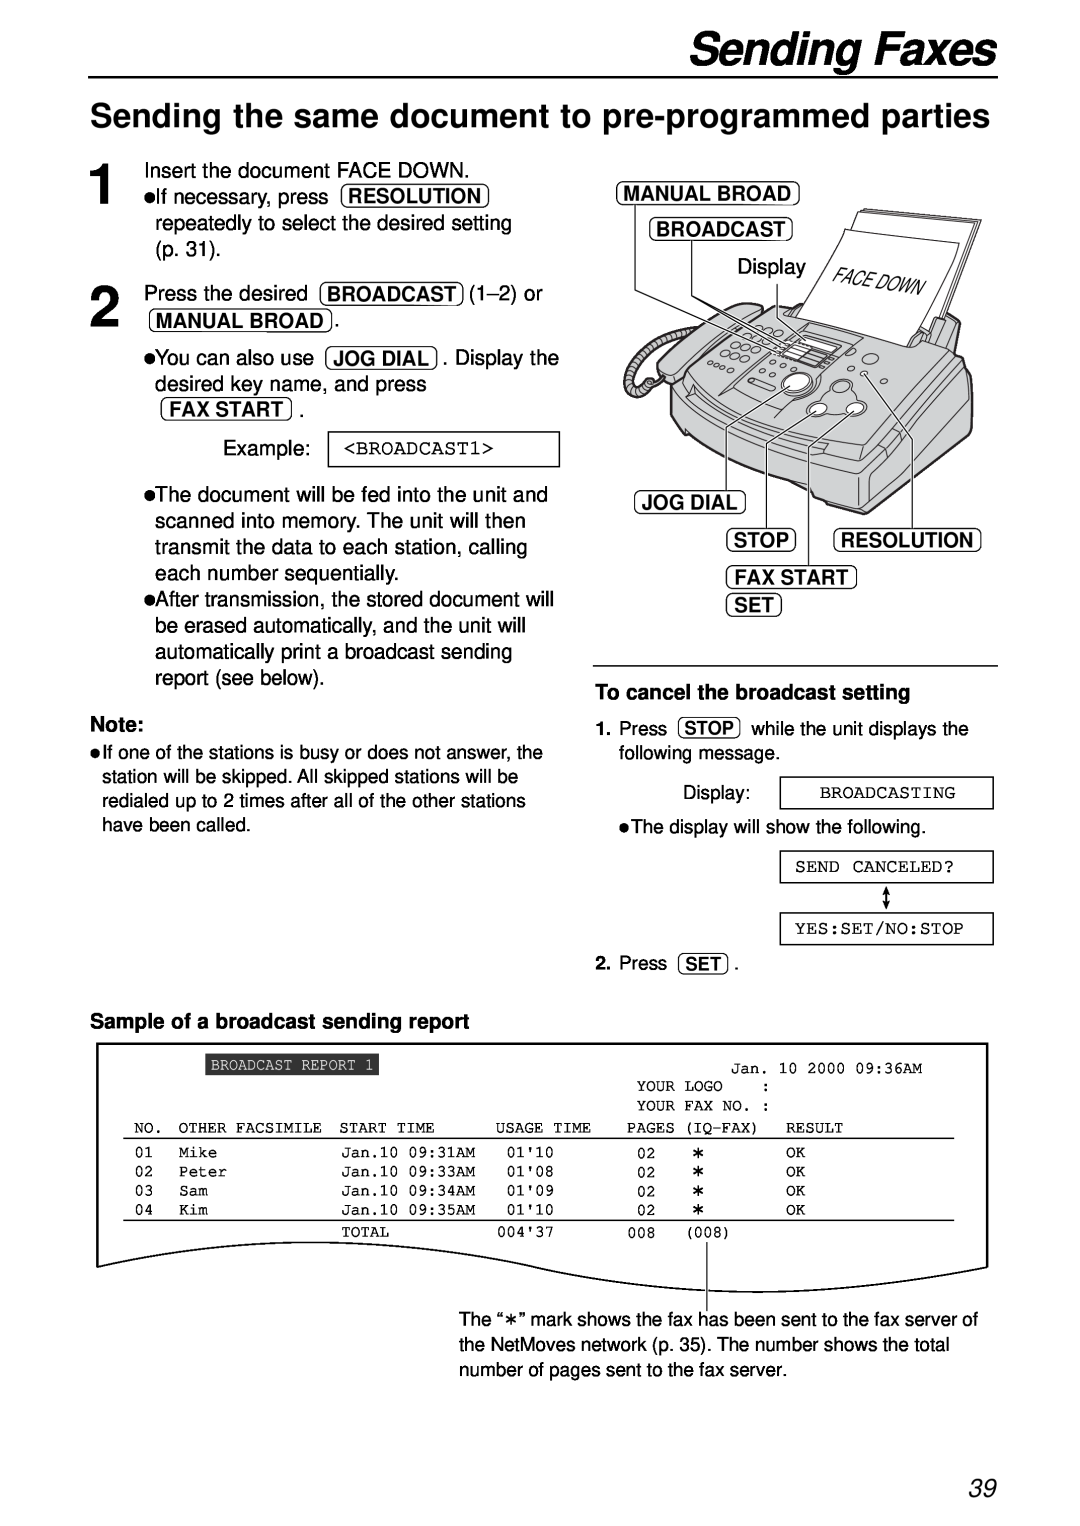 Panasonic KX-FL501 manual Sending the same document to pre-programmed parties, Sending Faxes, Resolution, BROADCAST 1-2 or 